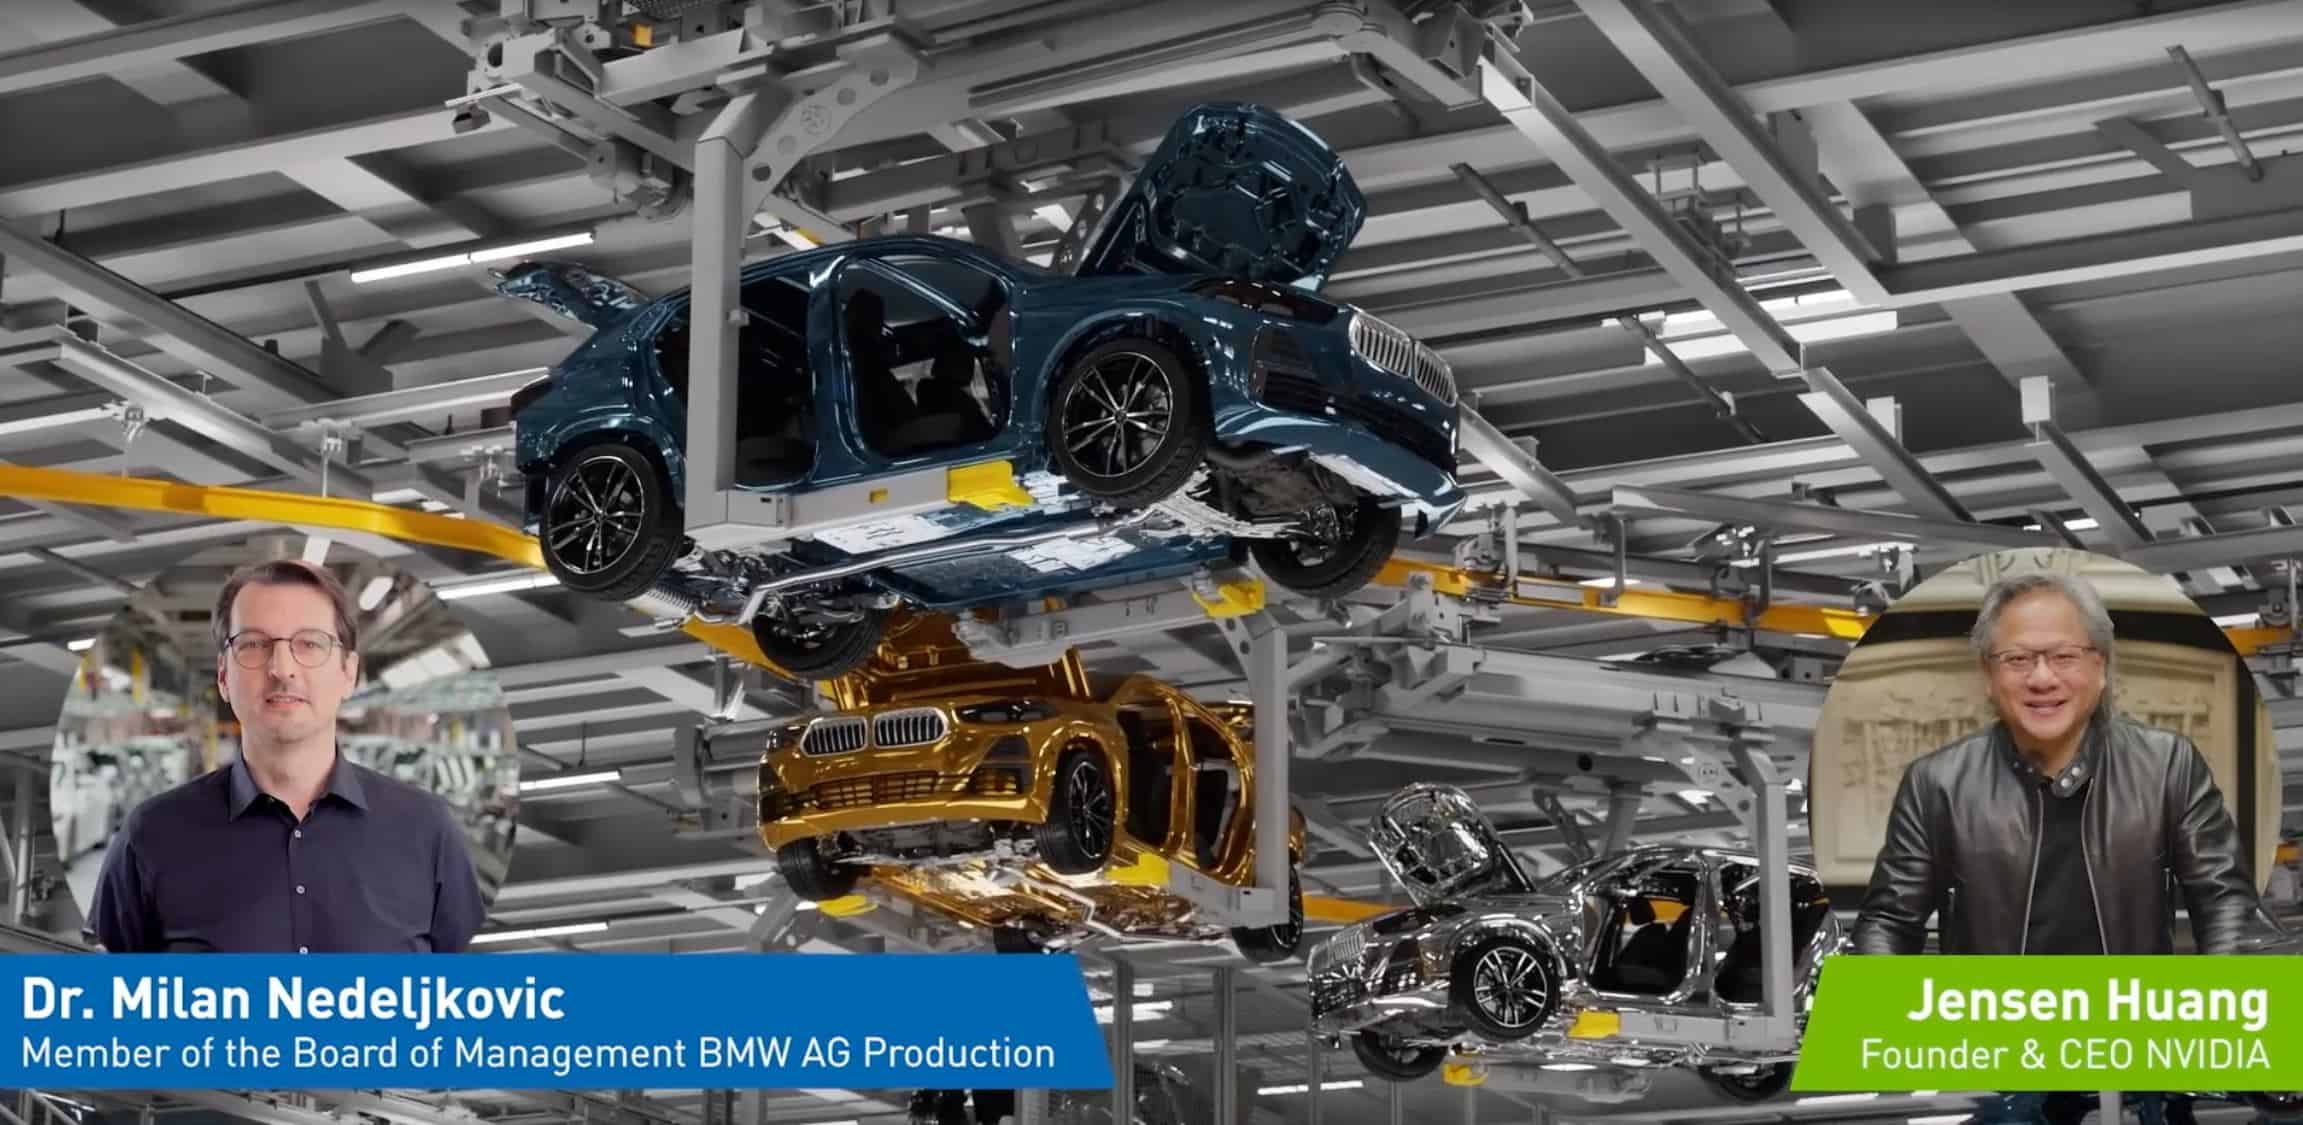 BMW Group and NVIDIA Factory Plan in Omniverse | auto connected car news